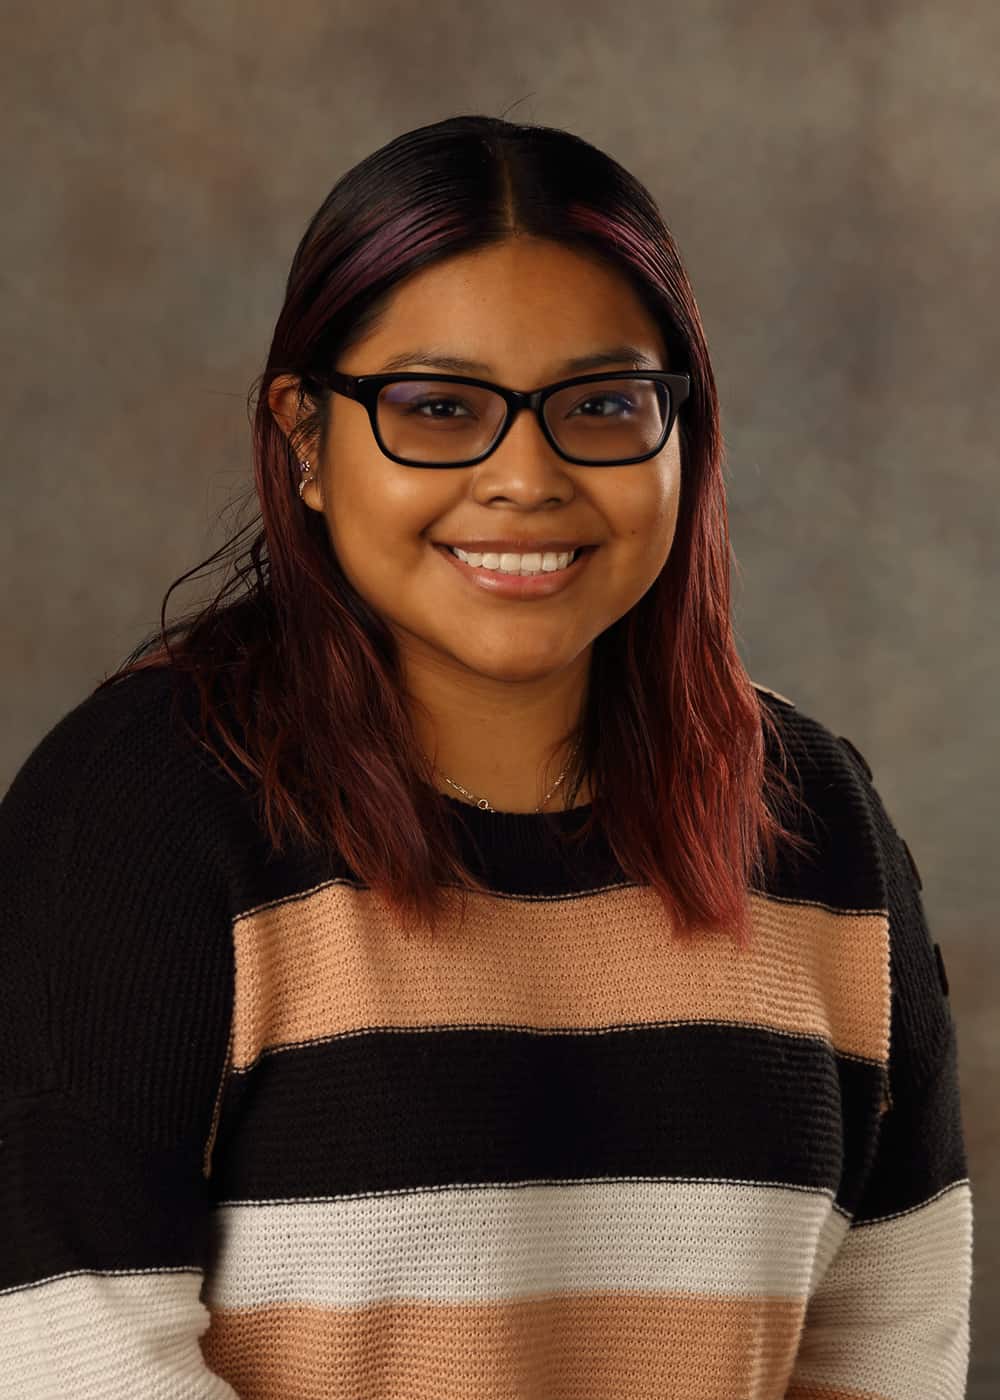 Photo of Co-Teacher Cathleen Escamilla. She is a Latina woman with black hair with reddish highlights, and black-framed glasses. She is smiling and wears a sweater striped with black, white, and tan.